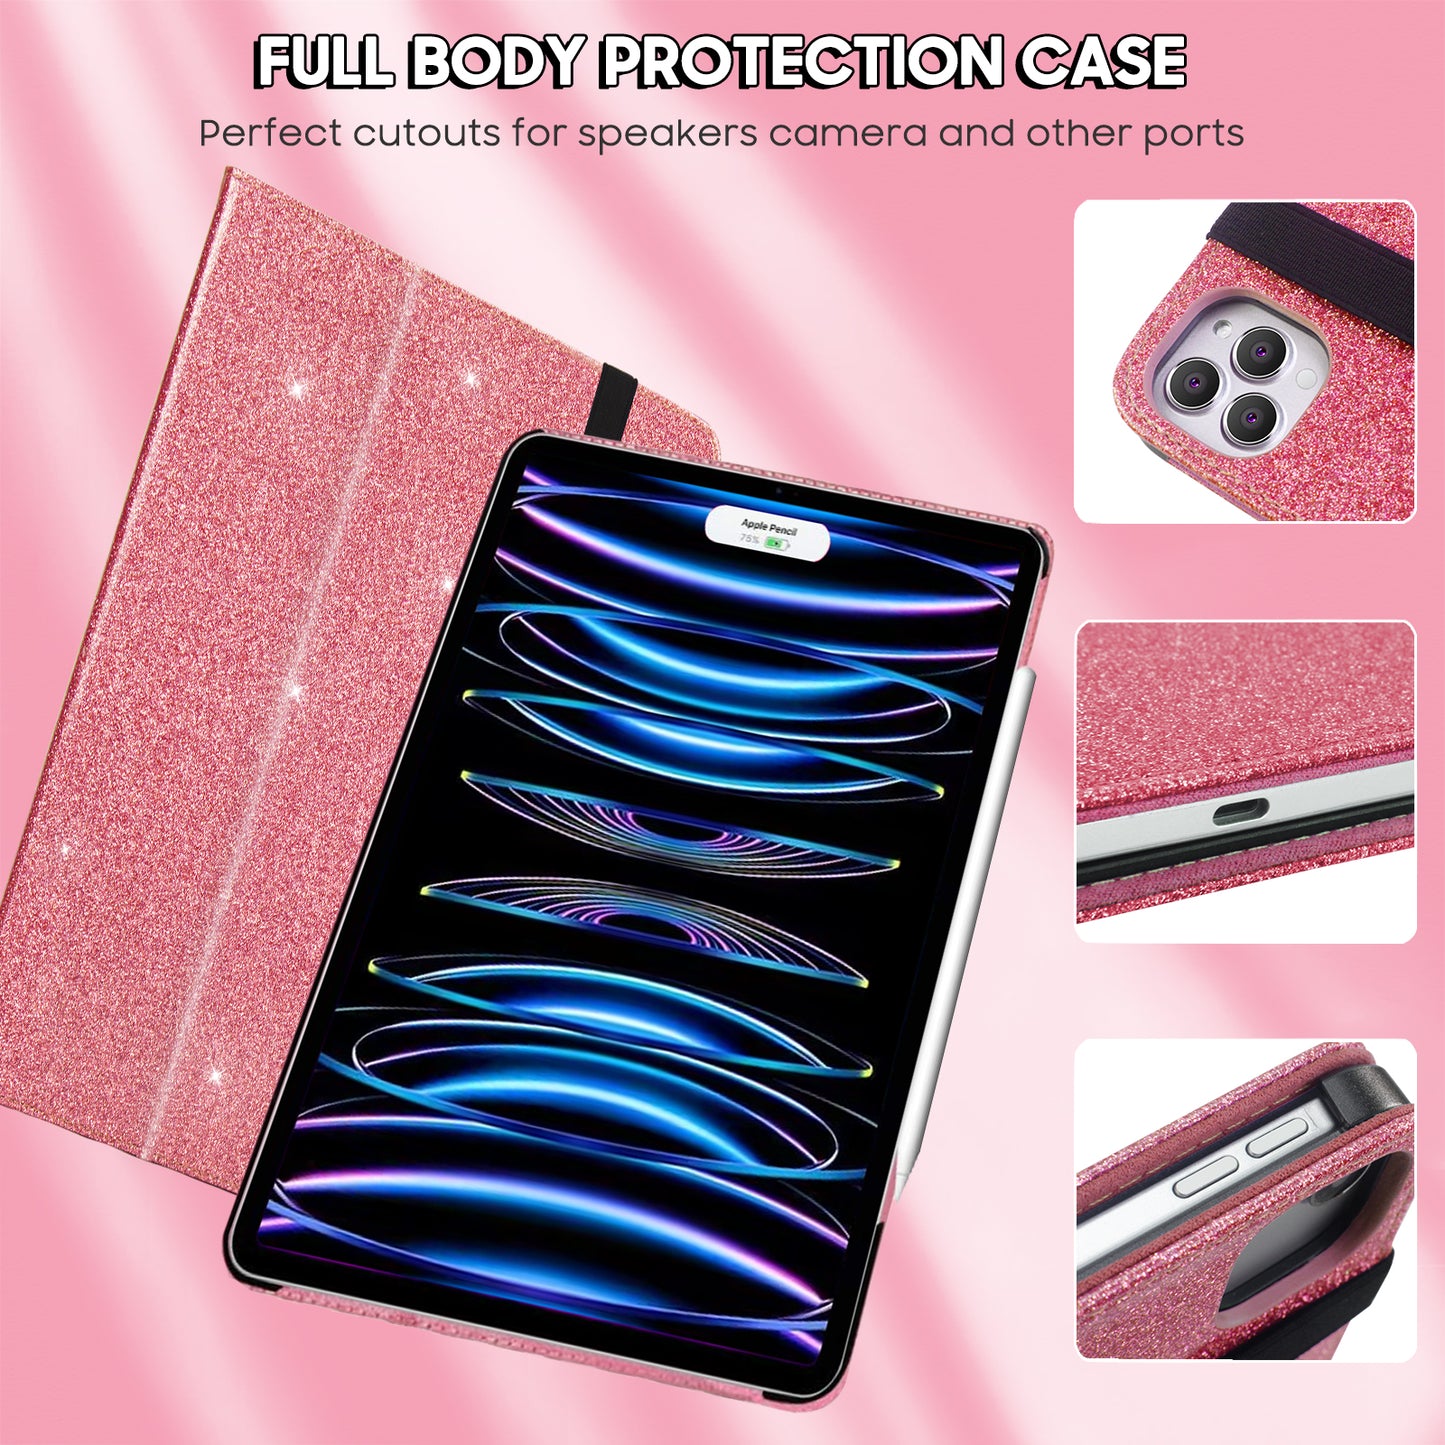 FANSONG Case for iPad Air 13 2024,Cover for iPad Pro 12.9 inch 2022 2021 2020 2018 With Auto Sleep/Wake PU Leather Glitter Smart Cover Flip Slim Pencil Slot for iPad Pro 12.9 6th 5th 4th 3rd